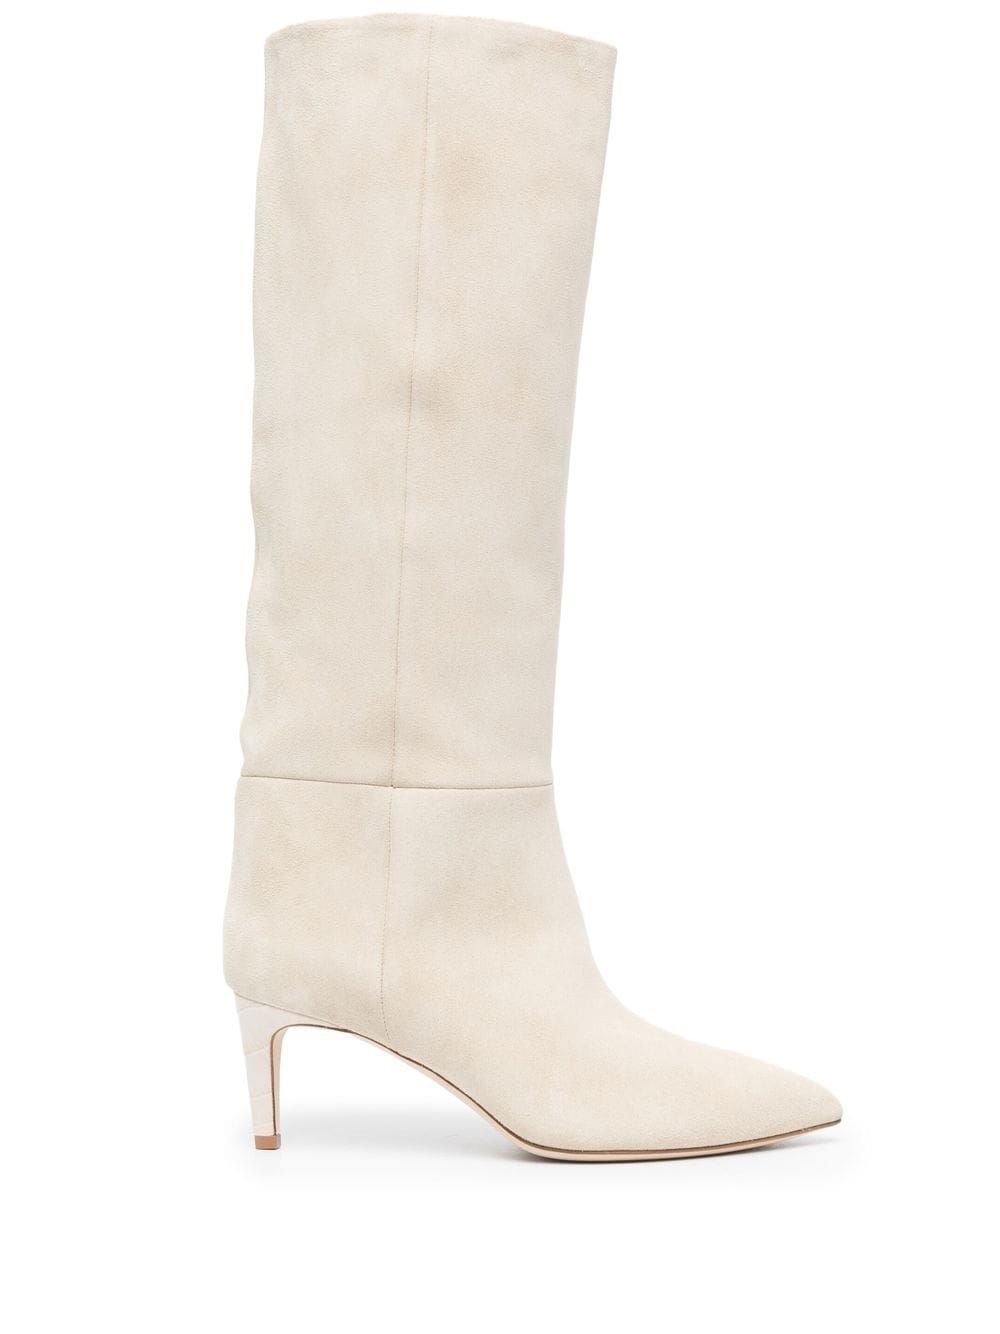 70mm leather stiletto boots | Farfetch Global